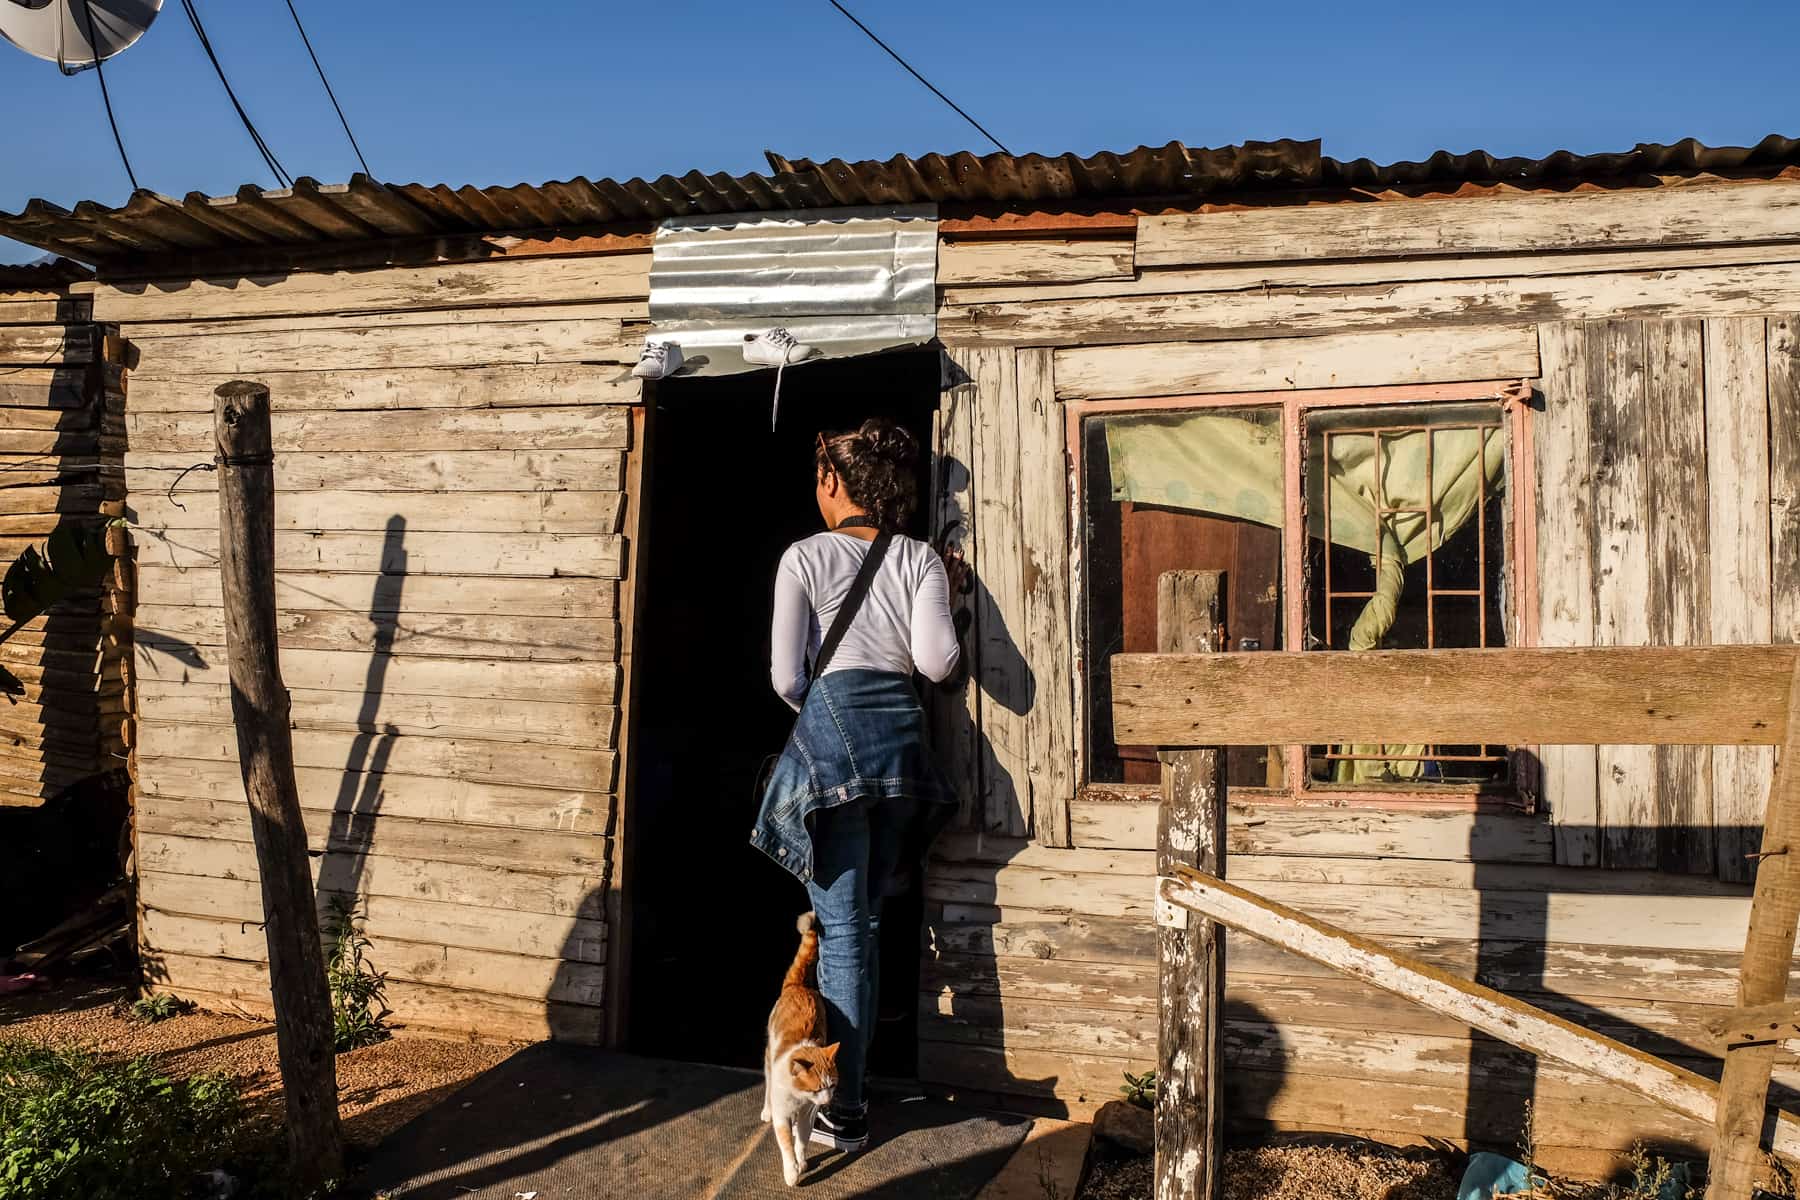 A woman in grey top and blue jeans walks into a wooden hut - a typical house in a township in South Africa. A white and ginger cat passes by her feet. 